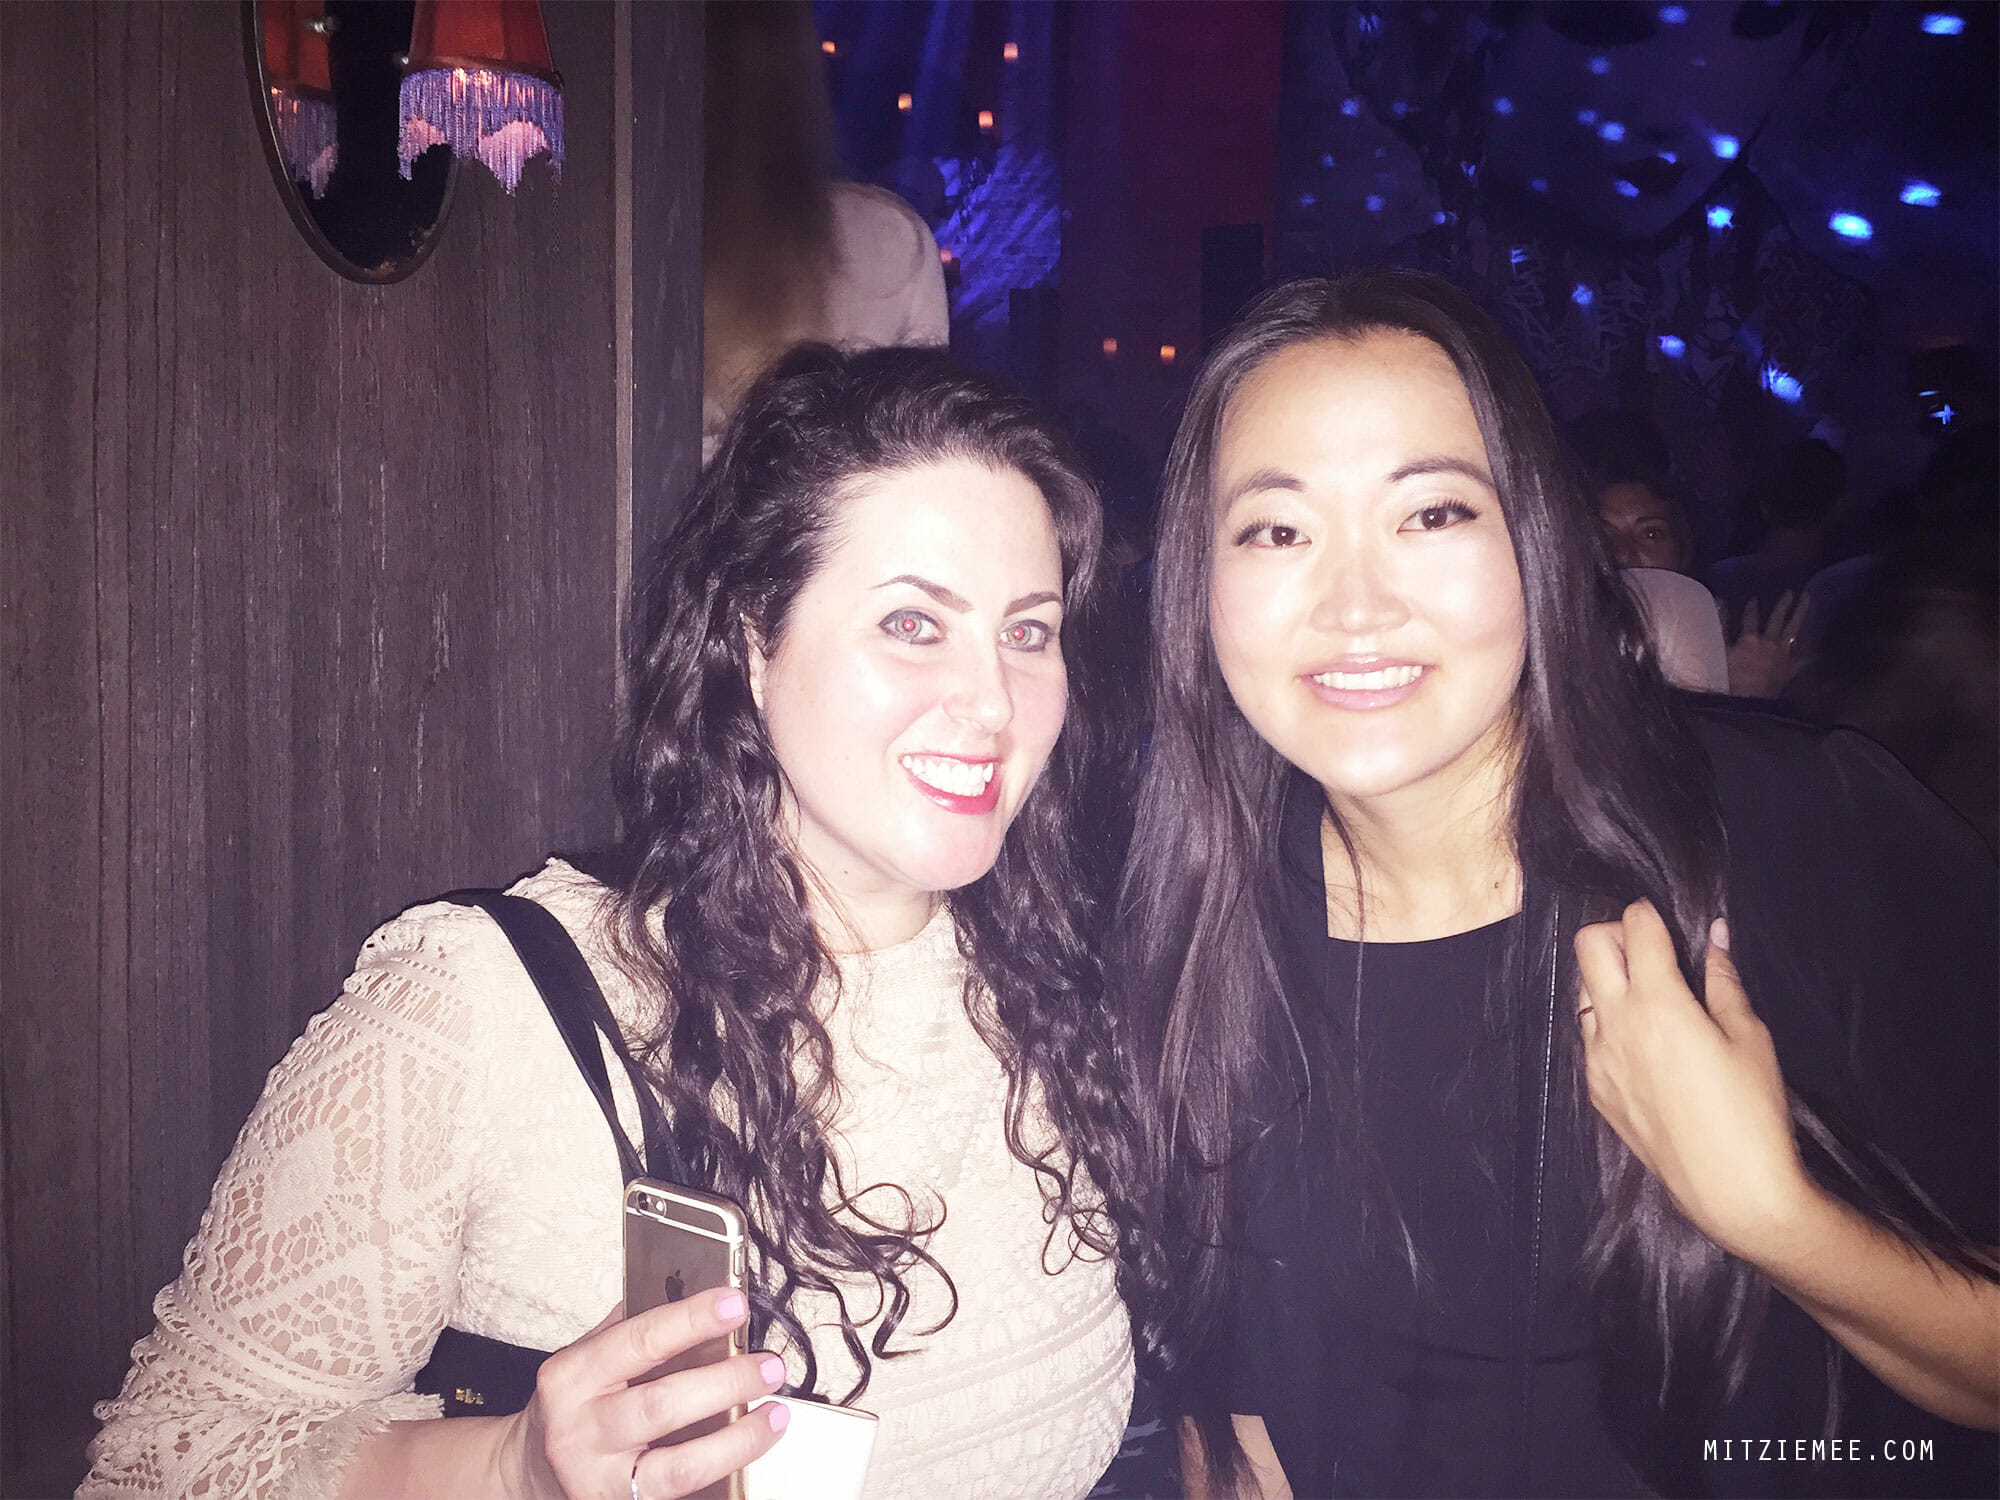 Tao Downtown, clubbing in NYC